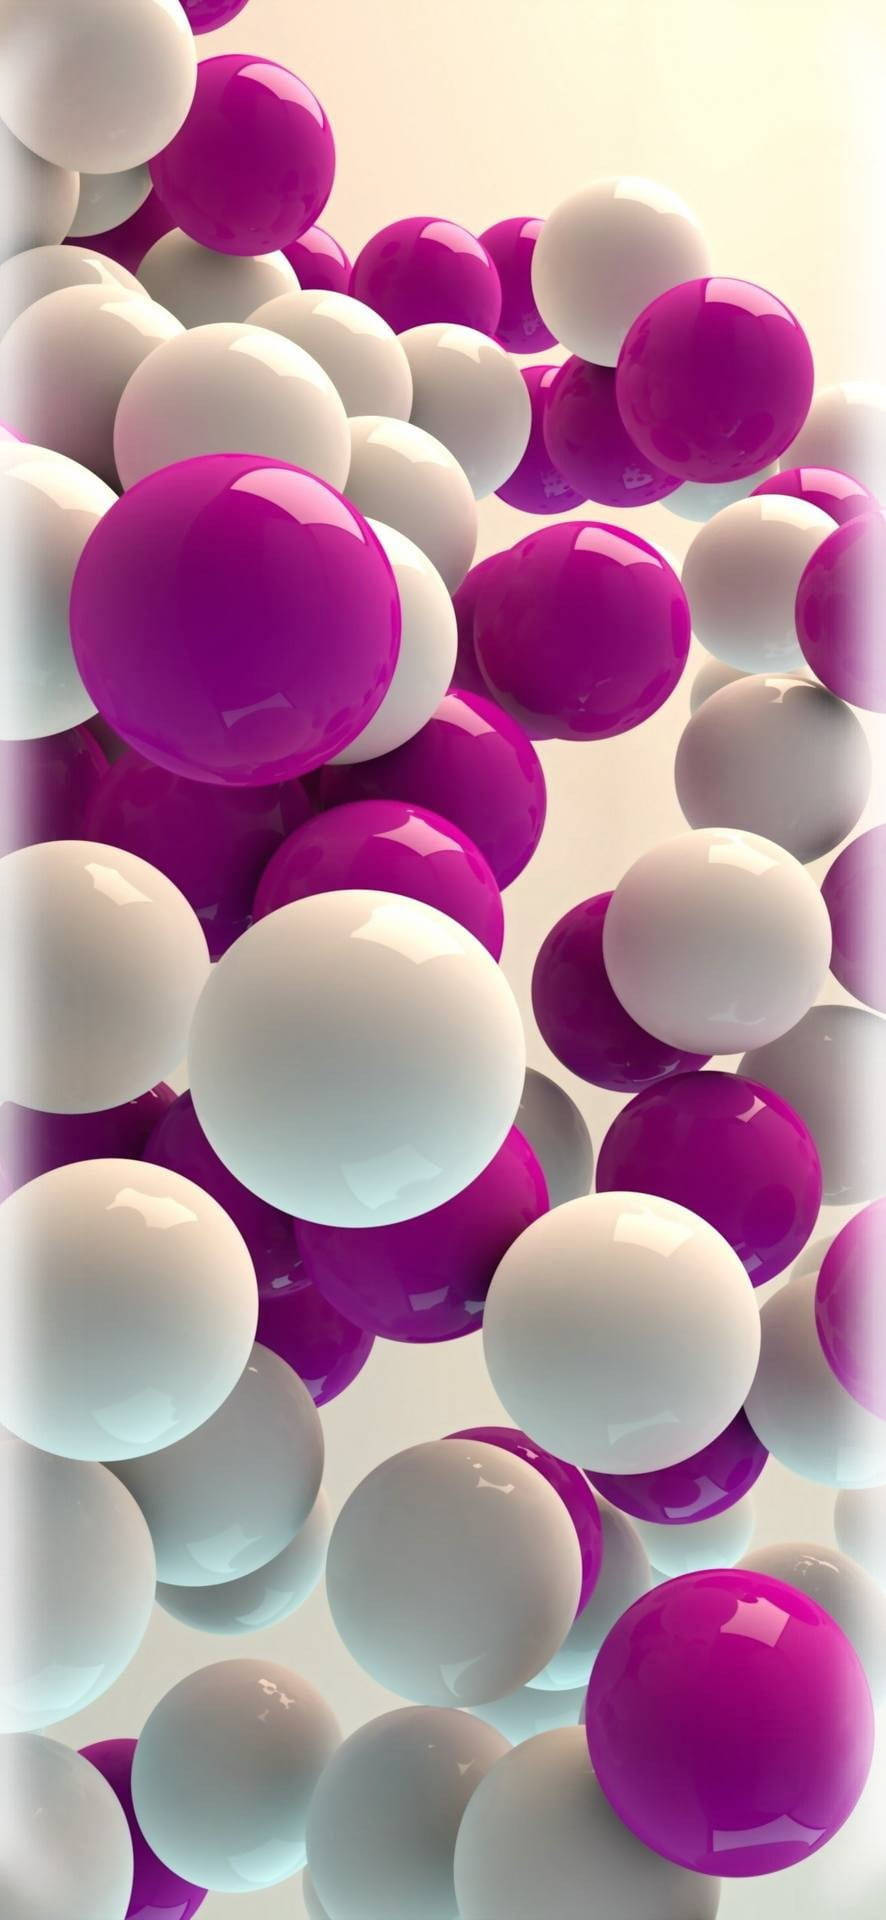 Samsung Galaxy S20 Floating in a Mesmerizing Background of White and Purple Spheres Wallpaper